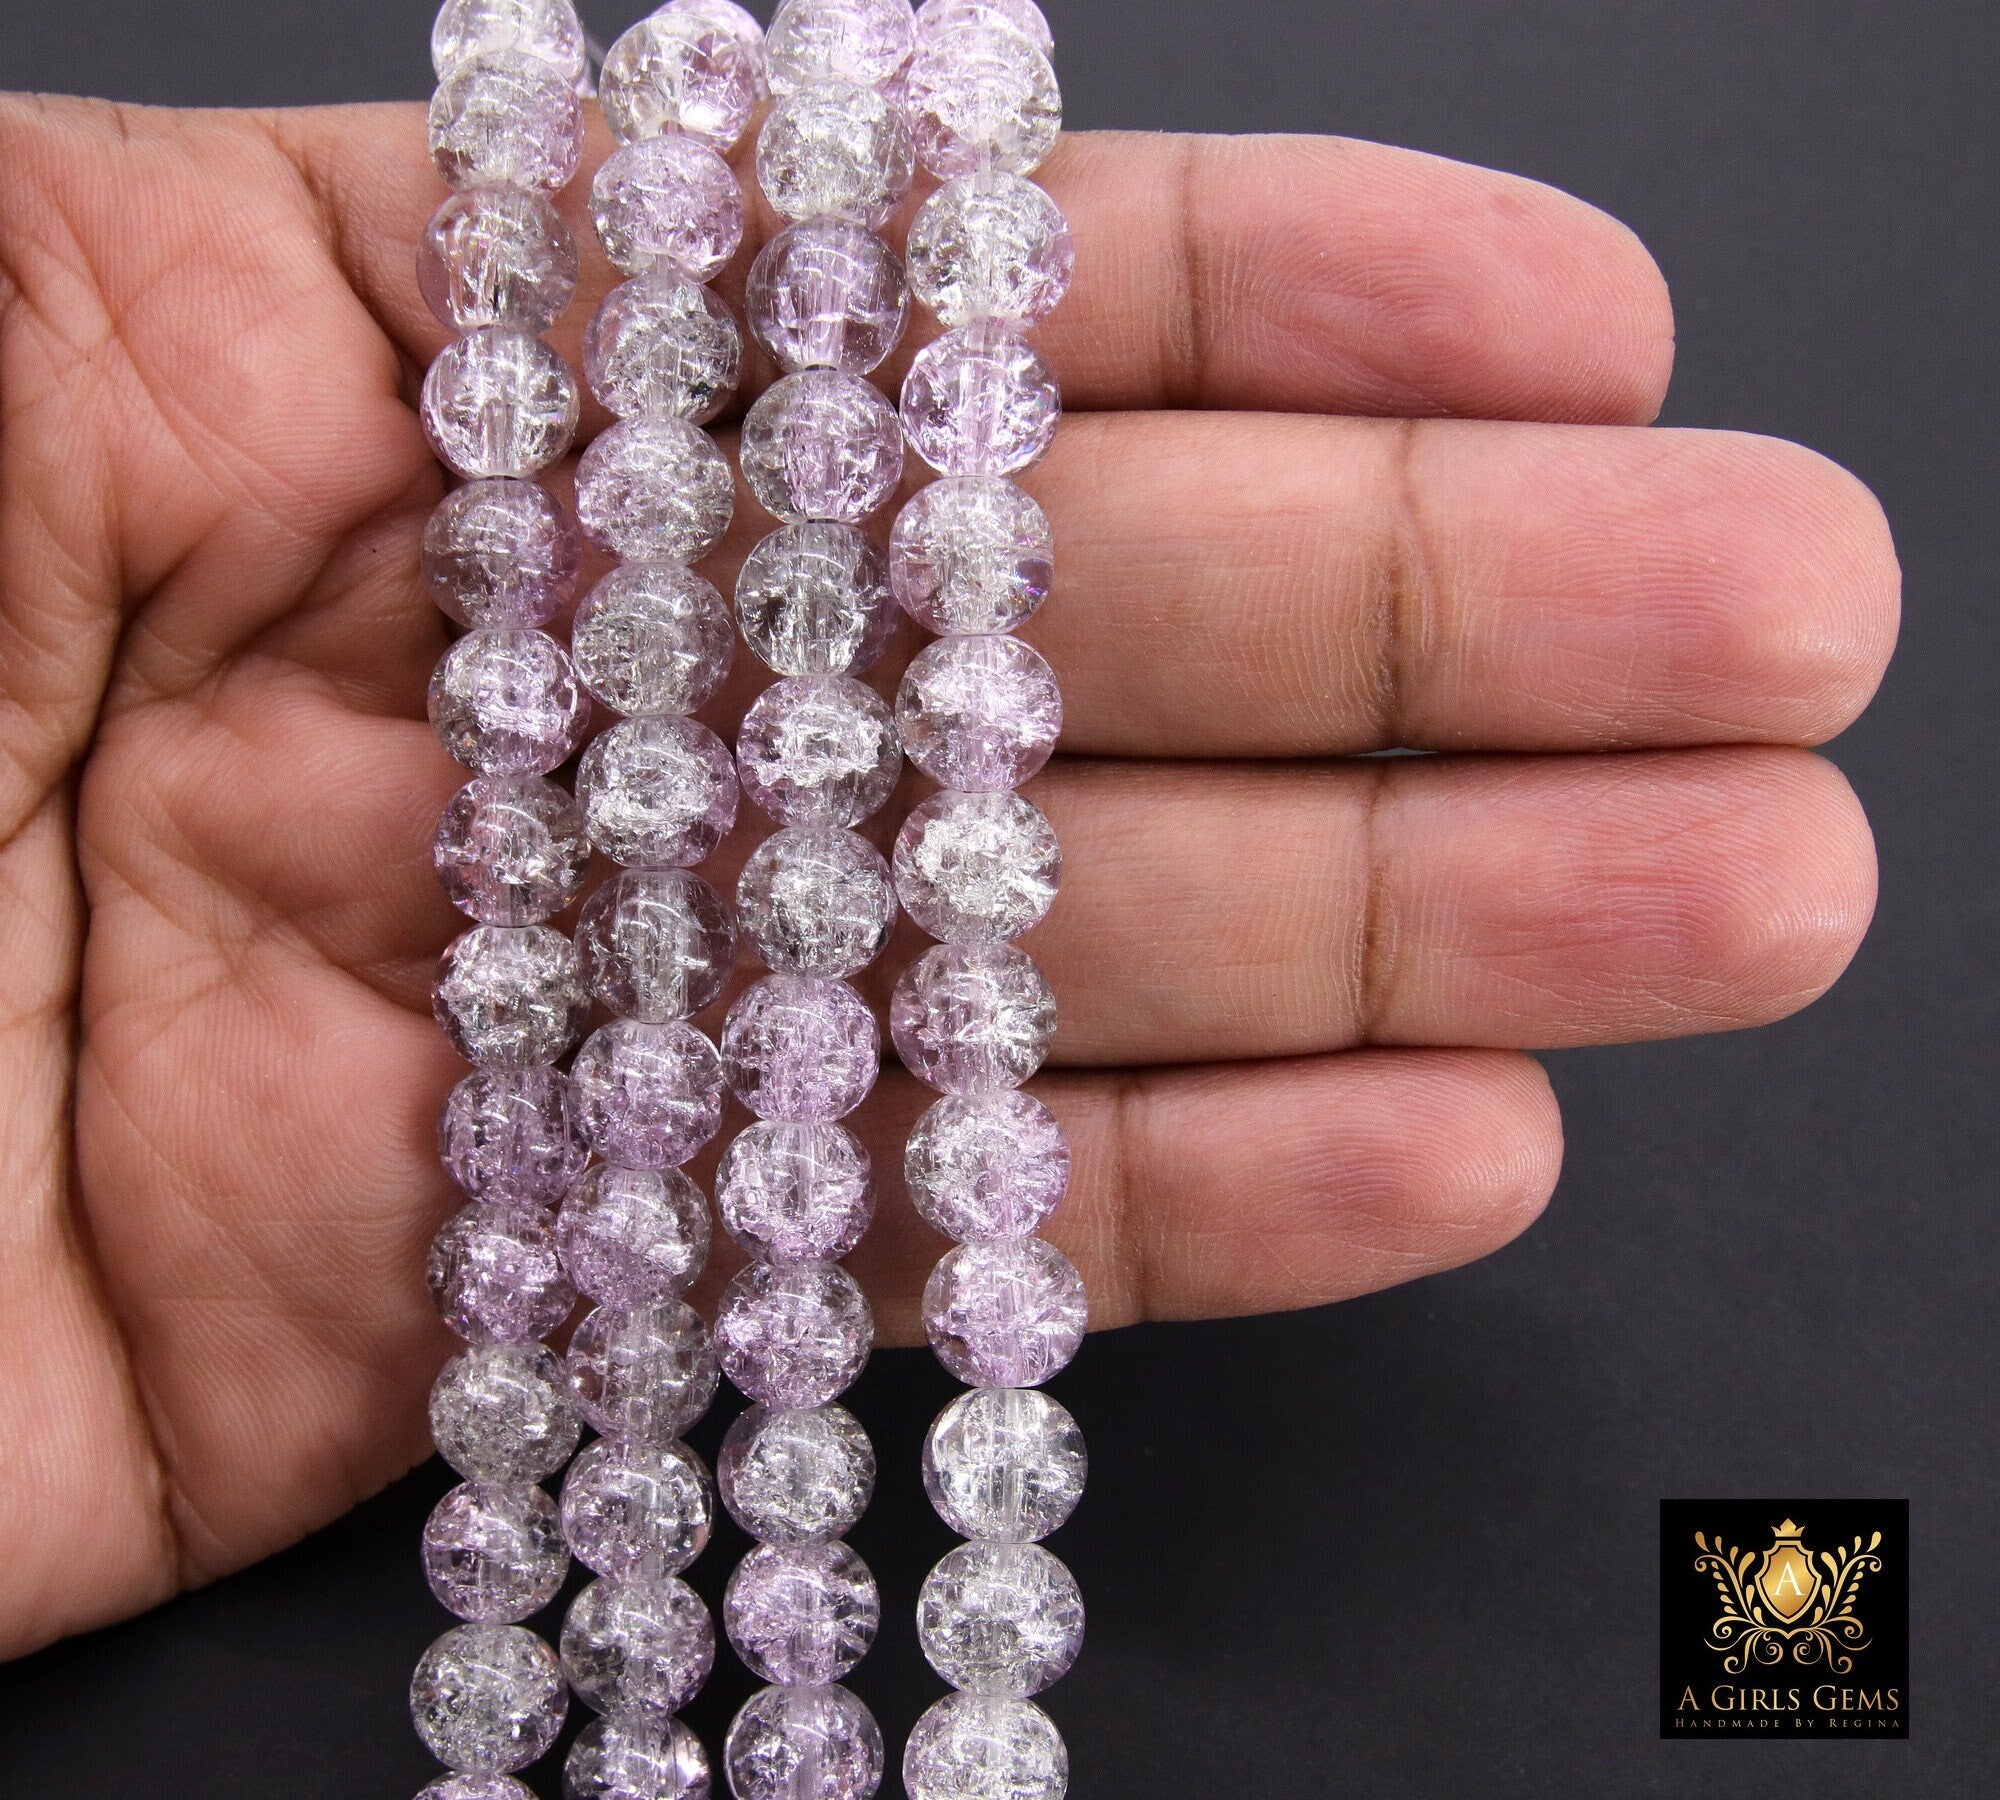 Clear and Purple Round Crystal Beads, Crackled Shimmery Glass Beads BS #122, size 8 mm, 31 inch Jewelry Bead Strands